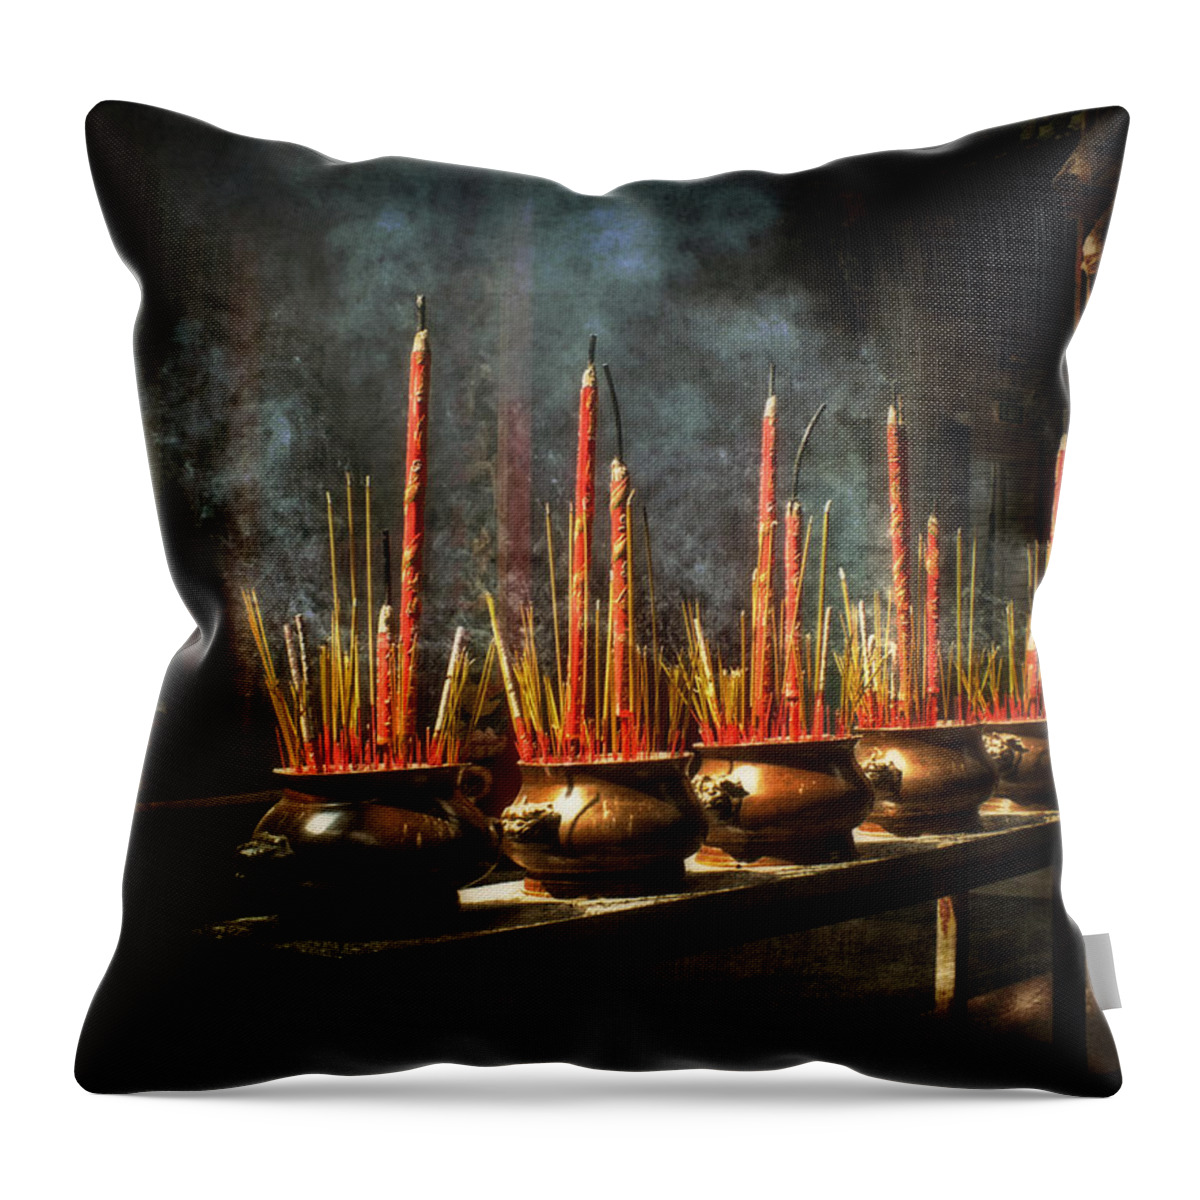 Travel Throw Pillow featuring the photograph Burning Incense by Lucinda Walter